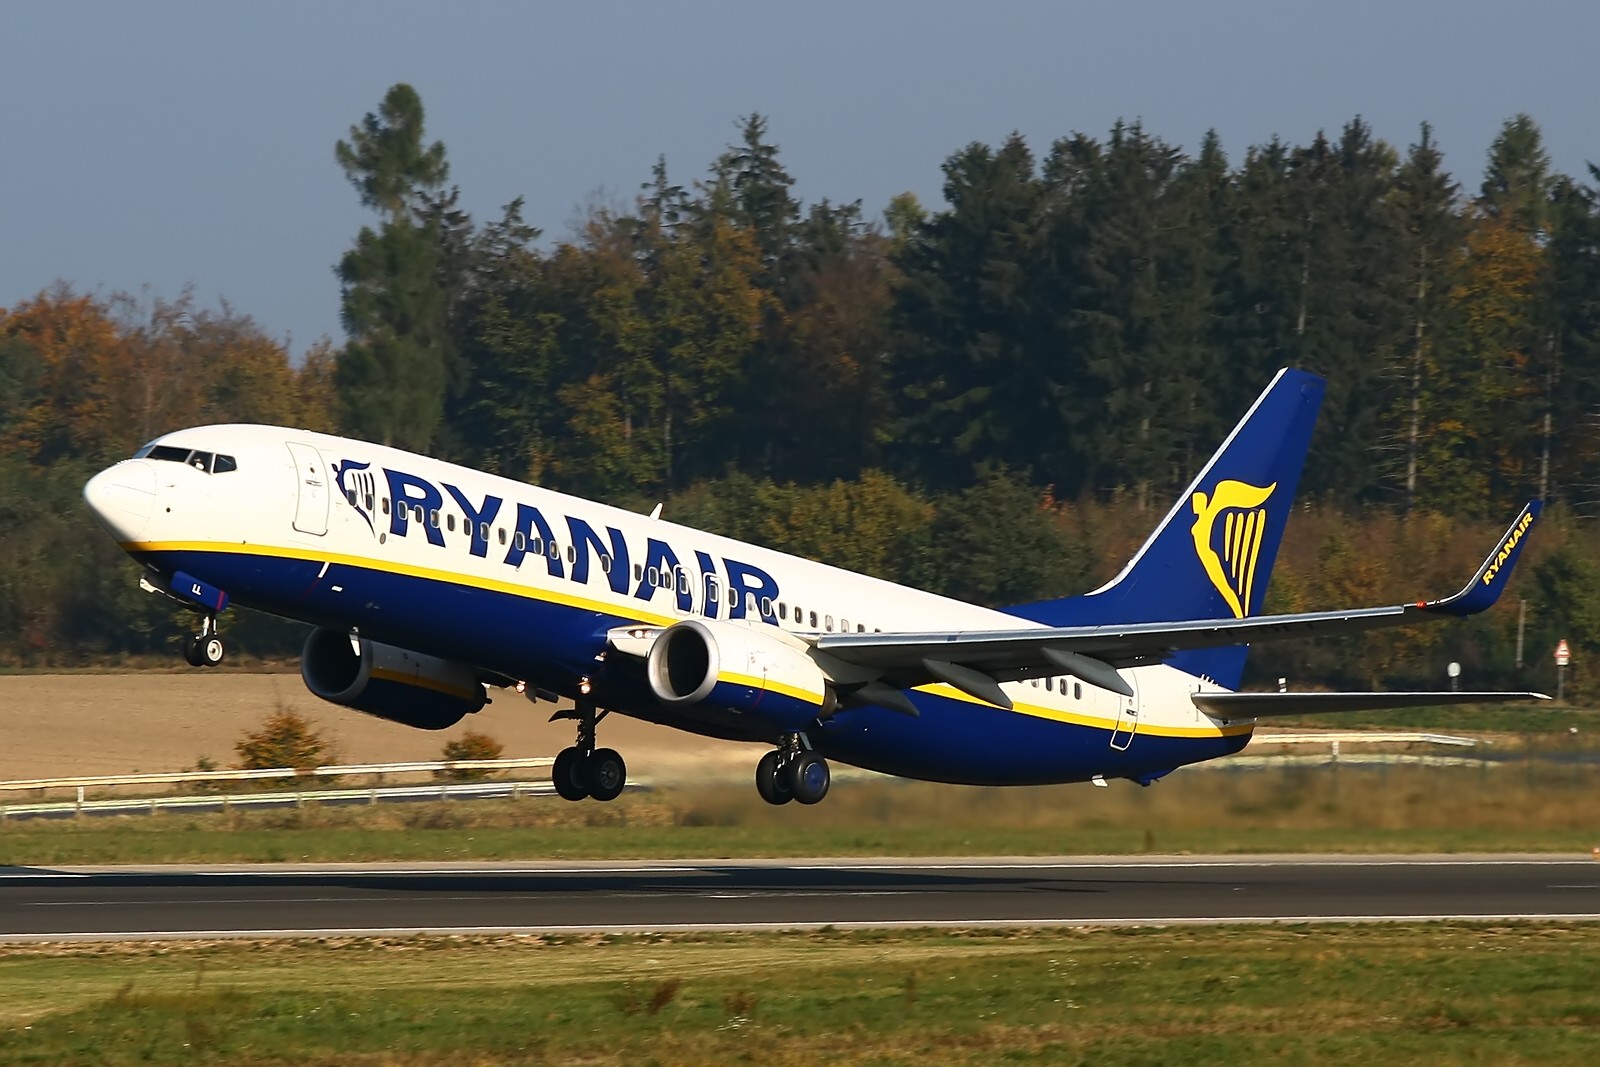 Ryanair Welcomes Liverpool Court Ruling Against “Claims Chasers”